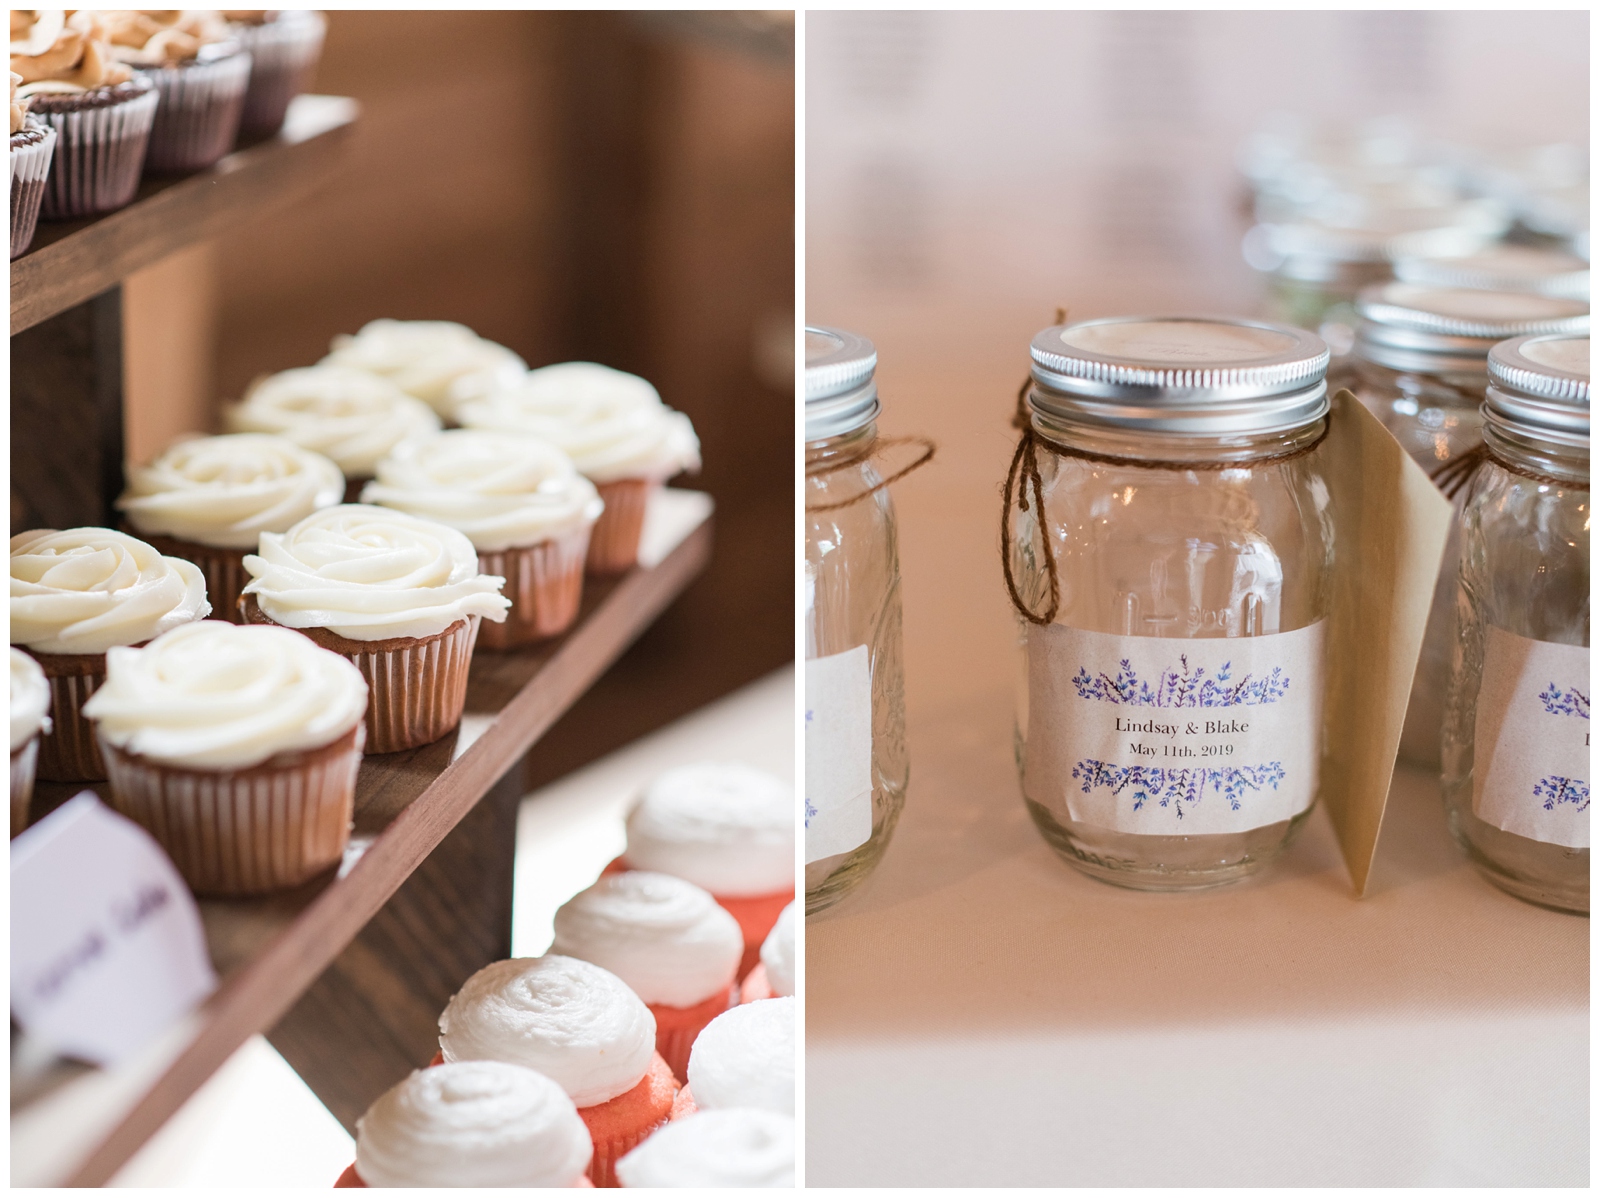 cupcakes and wedding favors for OH wedding reception